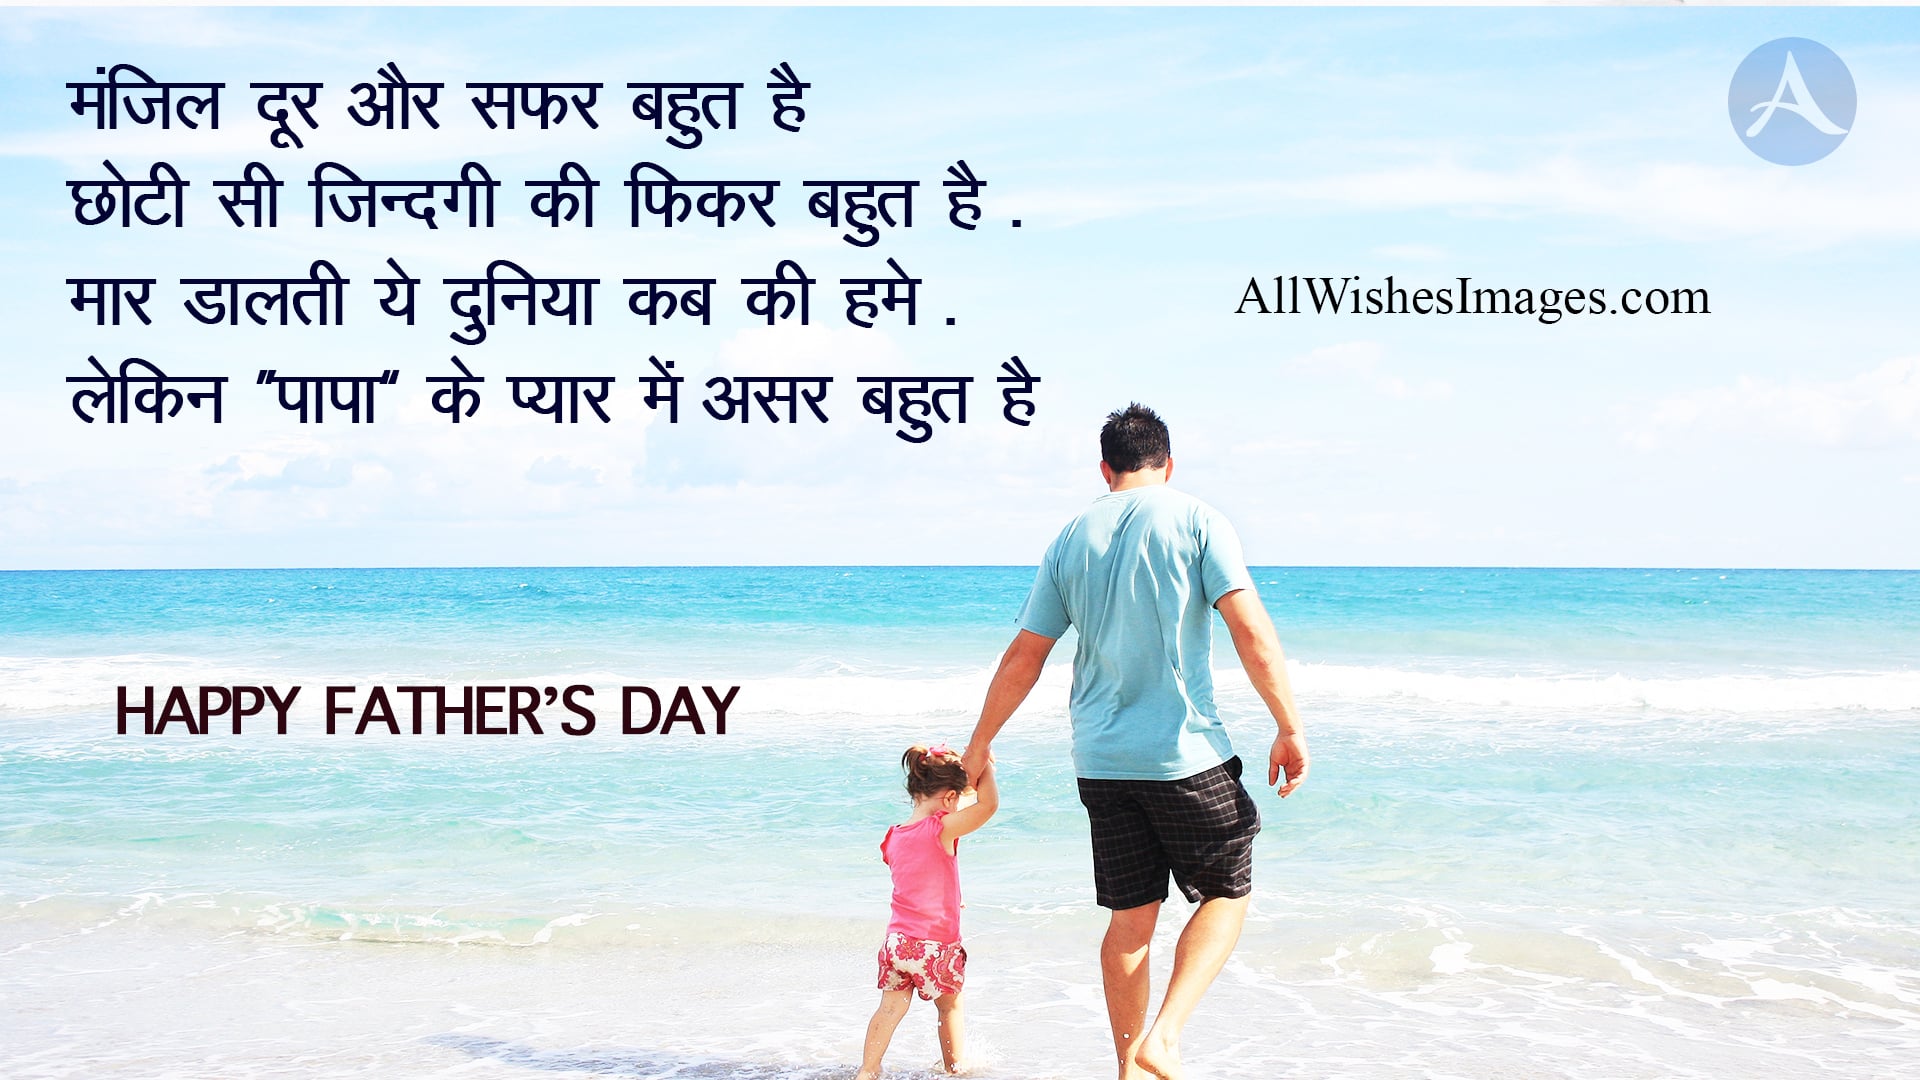 happy fathers day images free download - All Wishes Images - Images for  WhatsApp